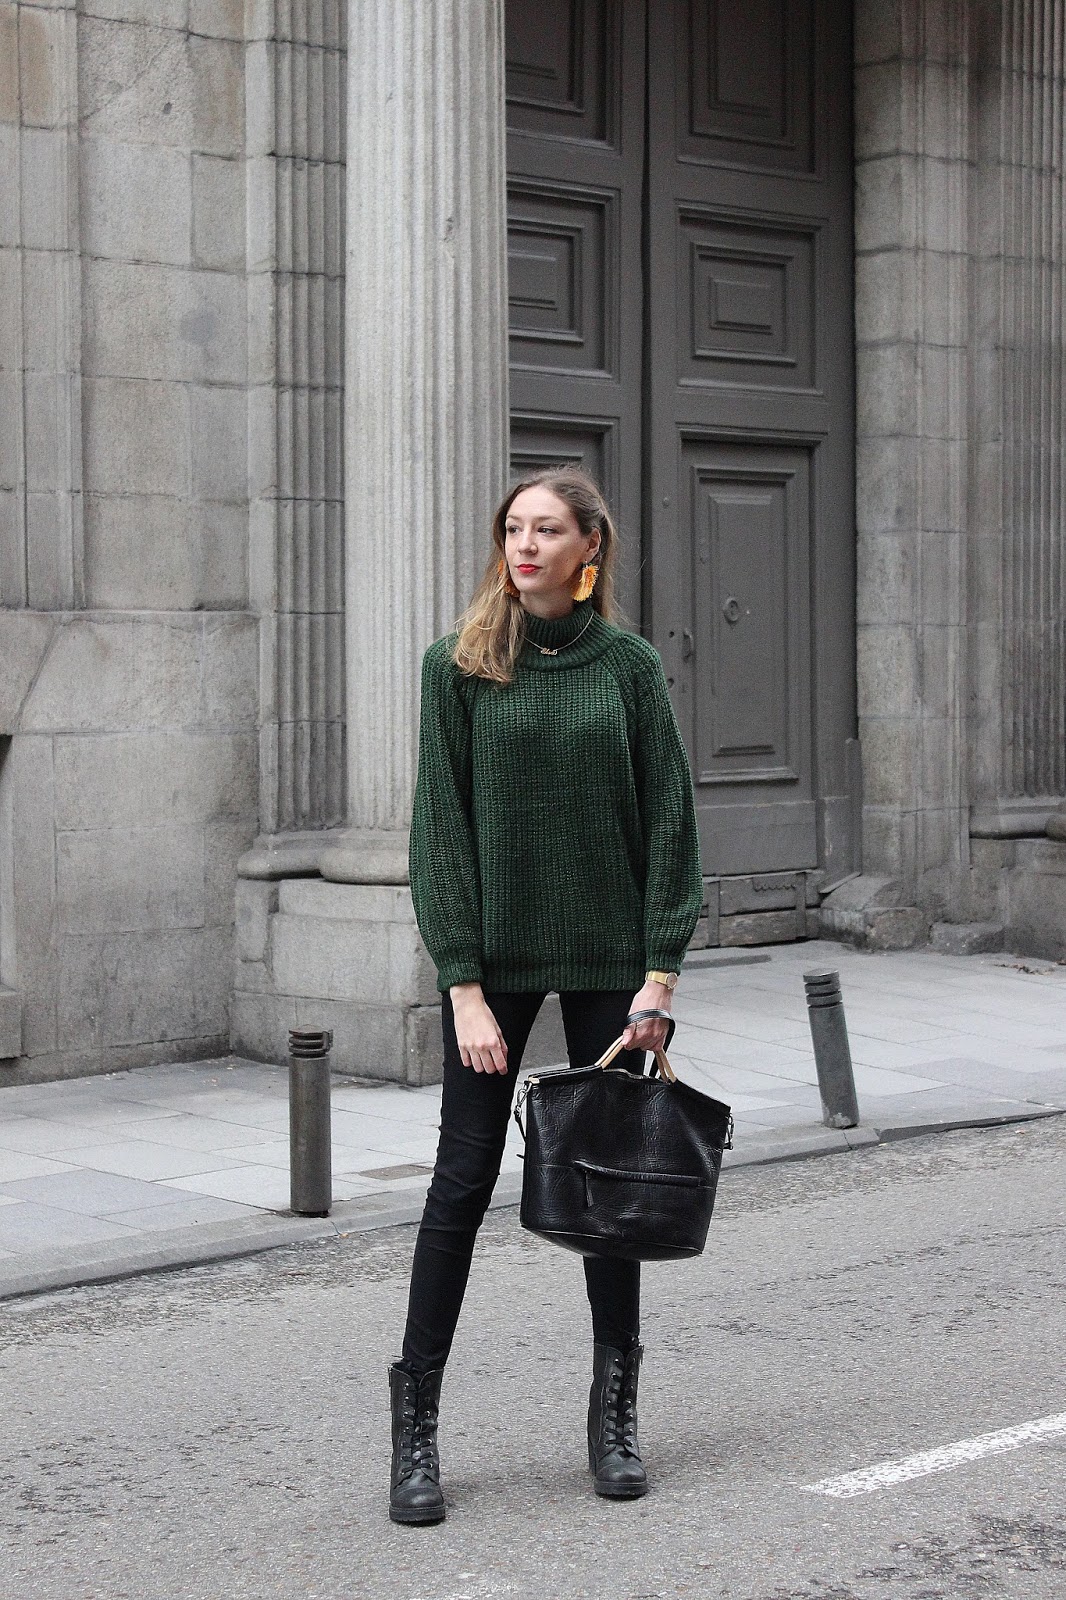 militar-boots-green-turtle-neck-doctor-maxibag-street-style-zaful